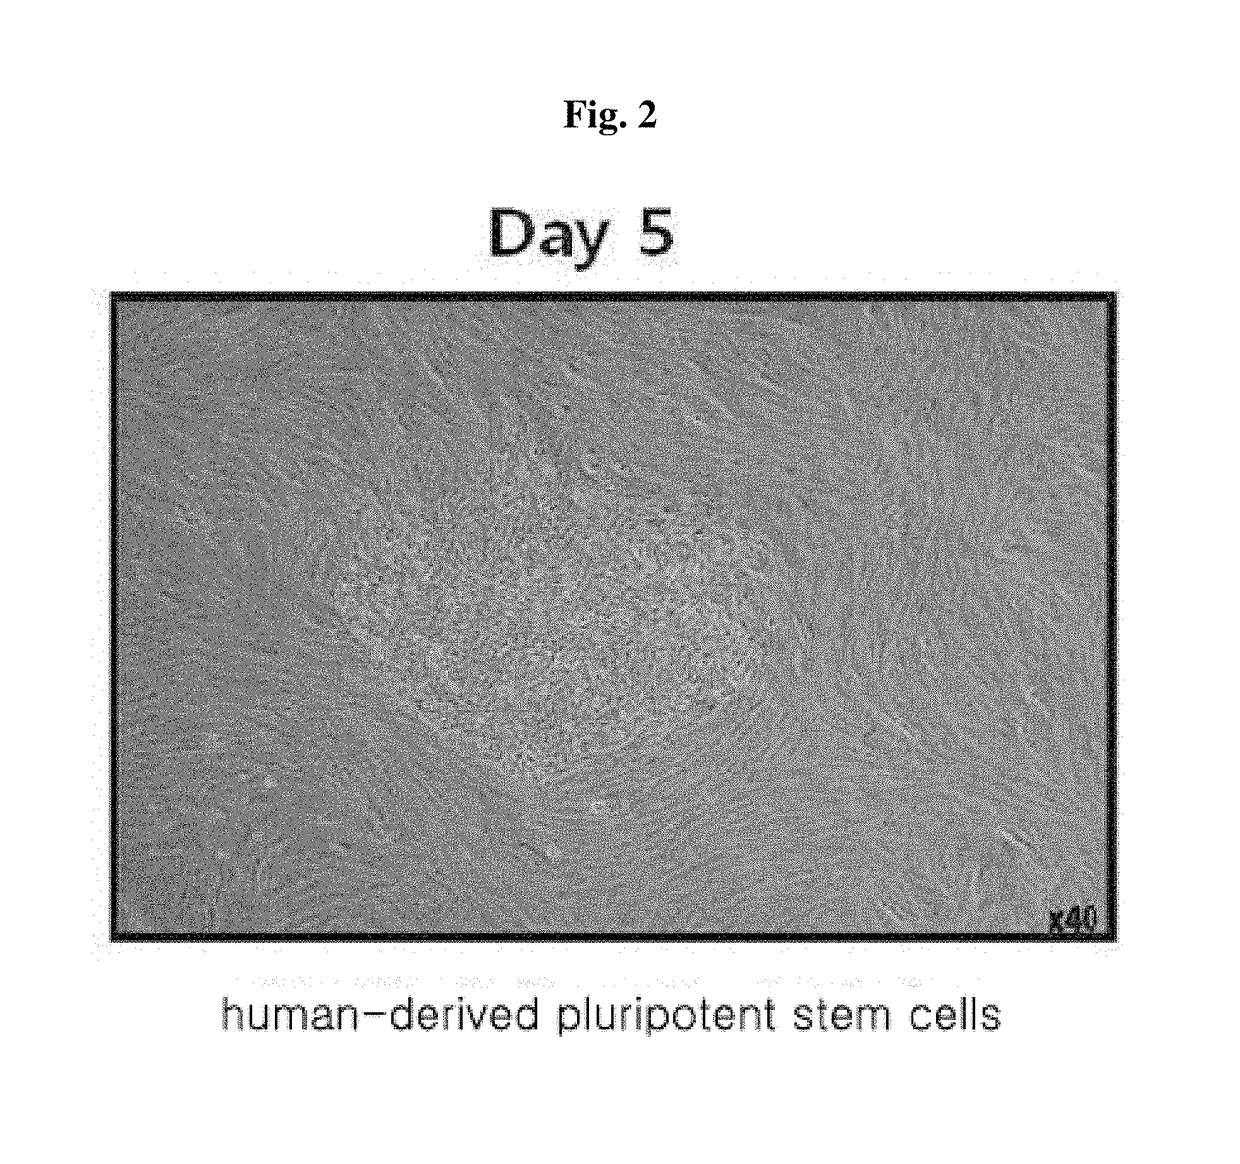 Method for inducing tailored pluripotent stem cells using extract of plant stem cells or plant dedifferentiated stem cells, and pluripotent stem cells produced by means of the method